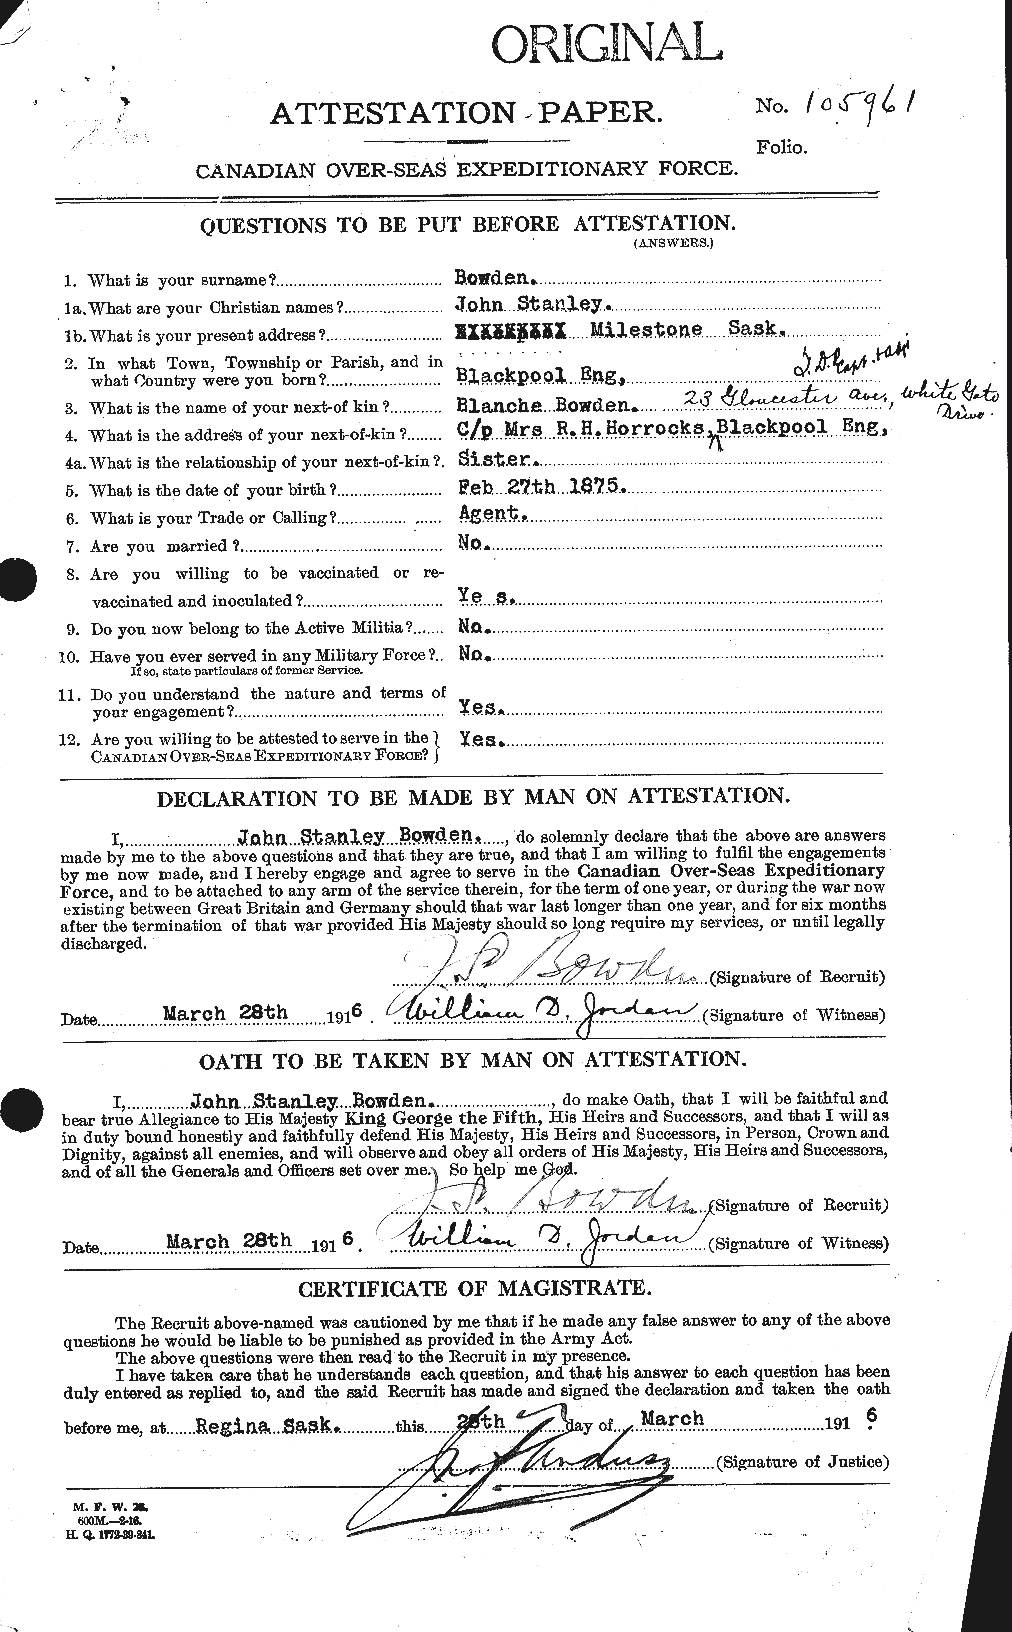 Personnel Records of the First World War - CEF 254593a